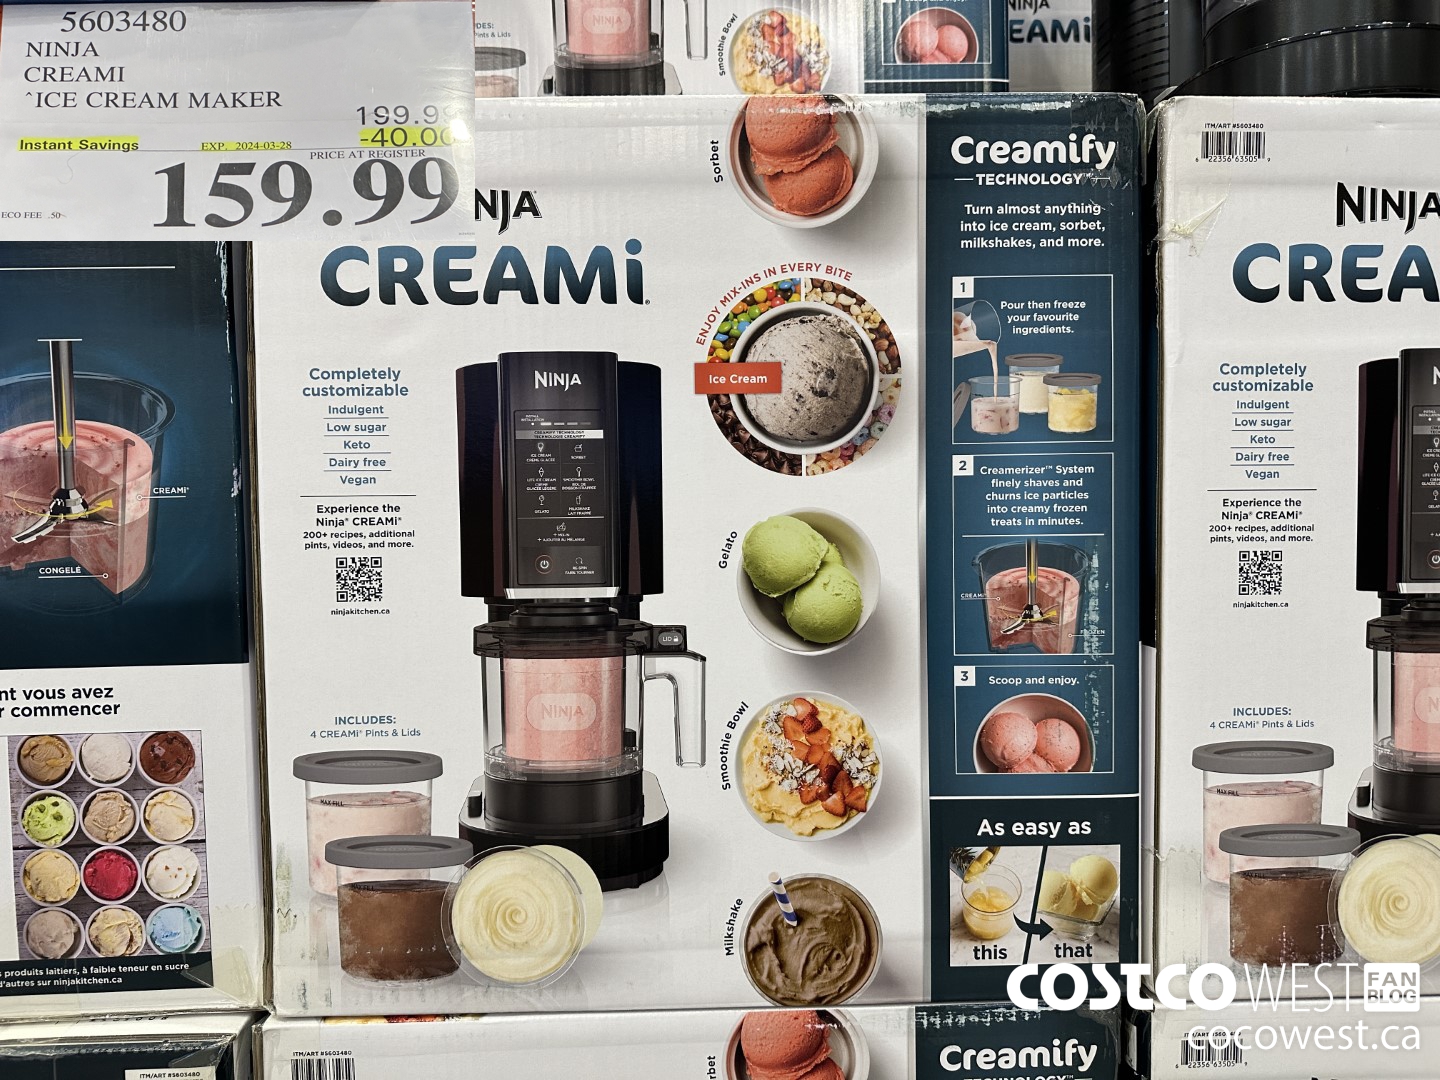 Costco Flyer & Costco Sale Items for Jan 23-29, 2023 for BC, AB, MB, SK -  Costco West Fan Blog